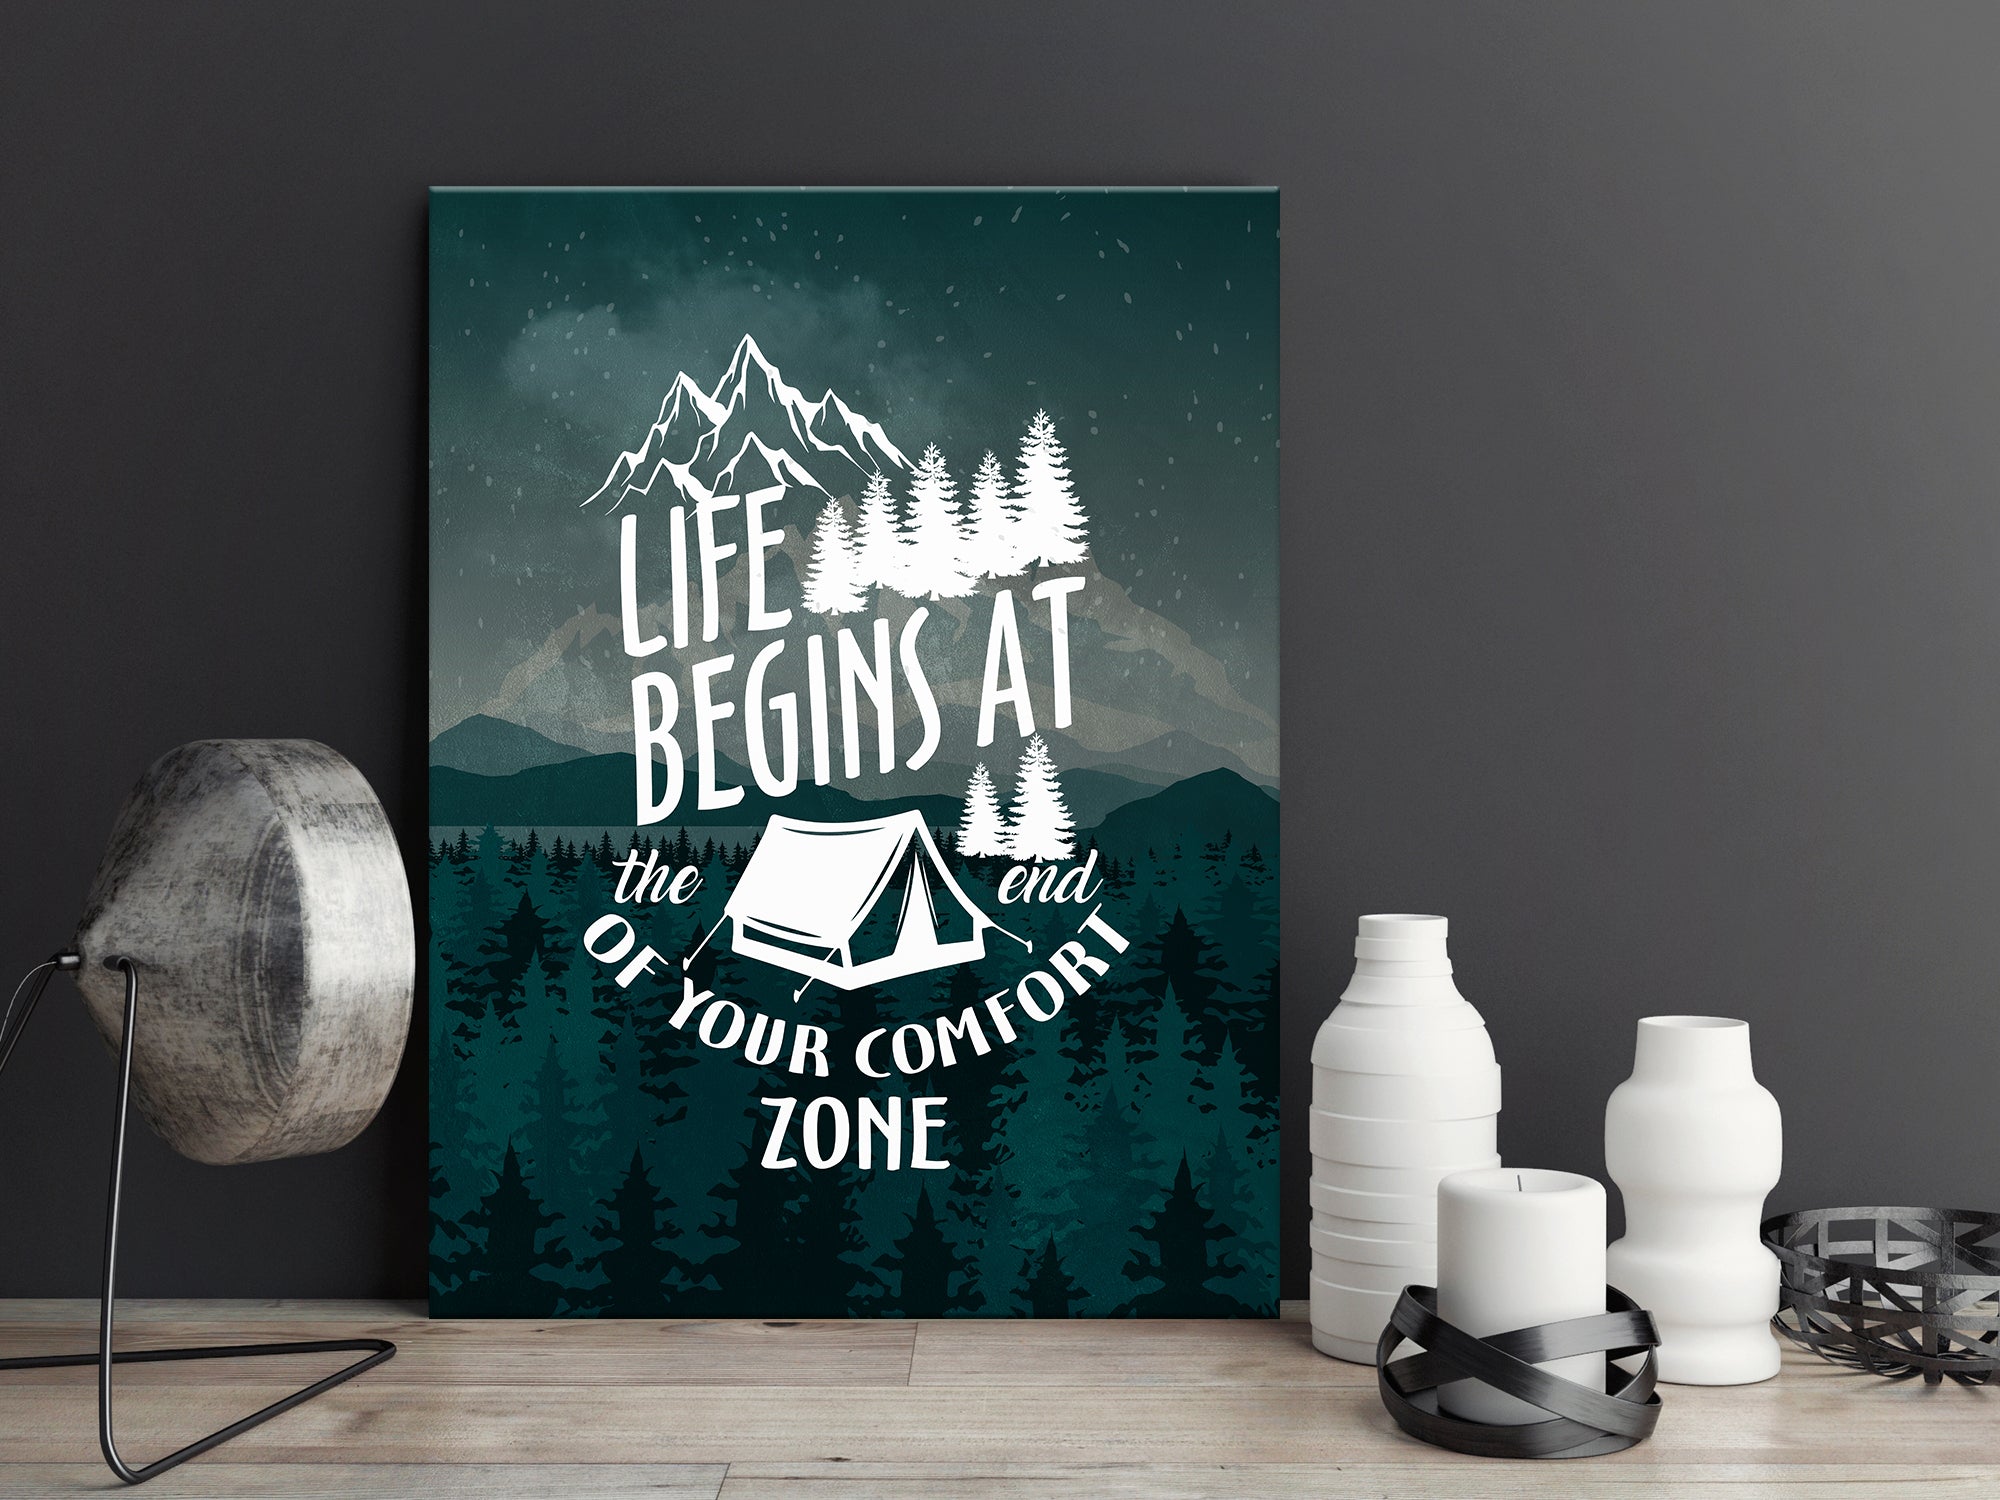 Life Begins at end of Comfort Zone - Living Room Canvas Wall Art